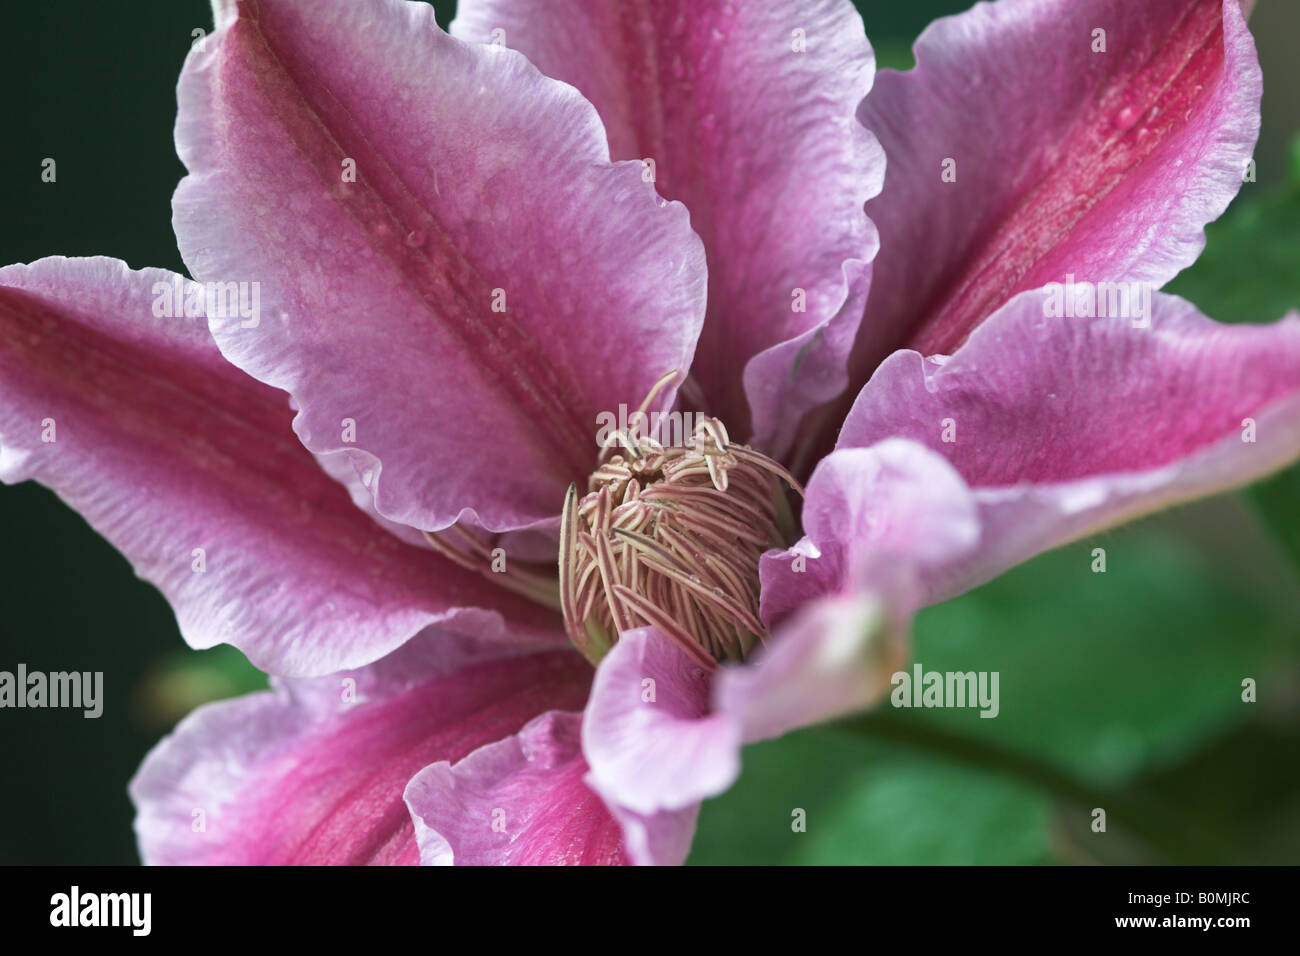 Close up of a pink petals from the flower of a Dr Ruppel Clematis plant Stock Photo